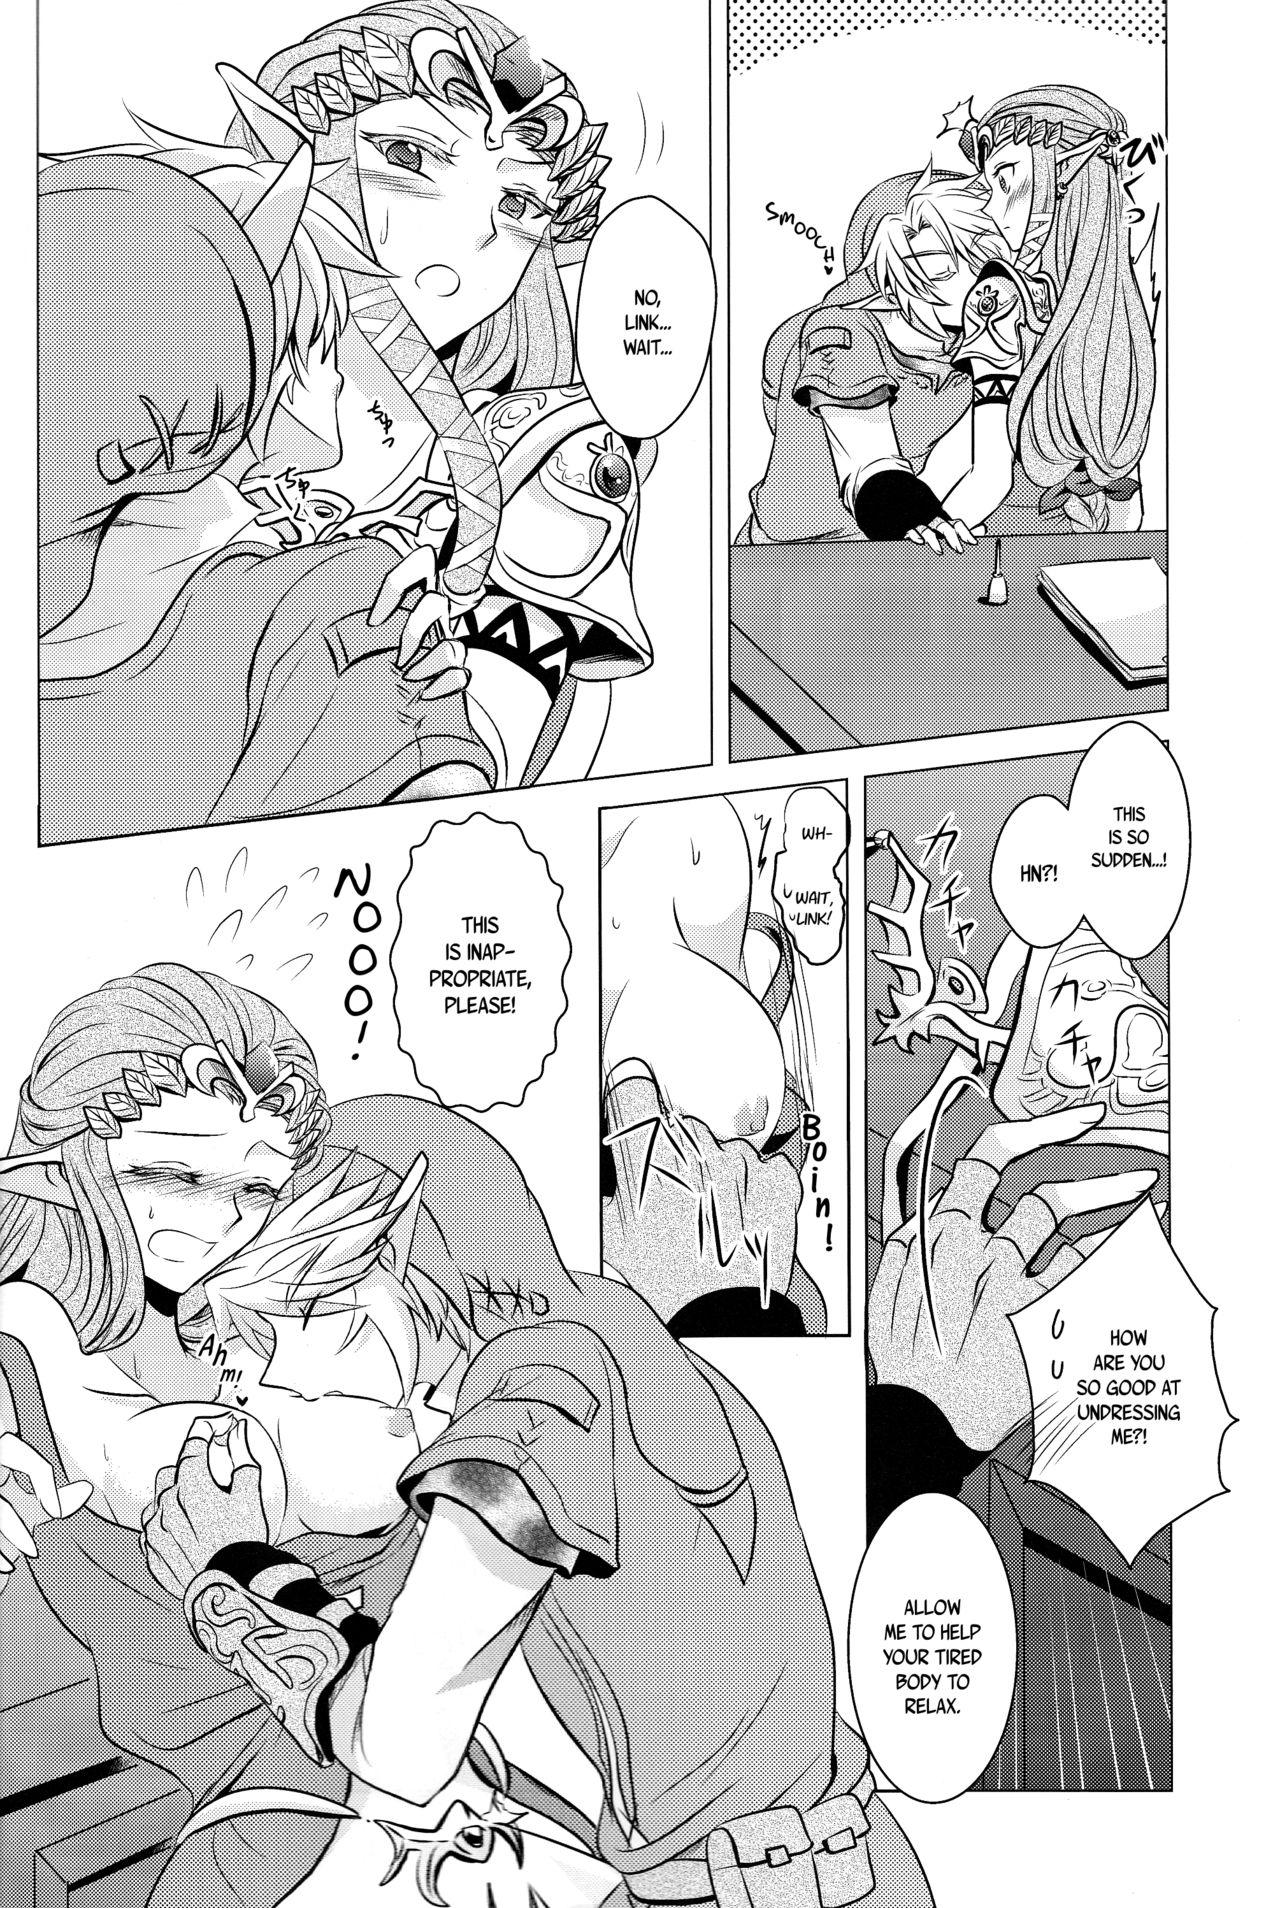 Jacking Off Ameiro no Jikan | Amber Times - The legend of zelda Ass - Page 12